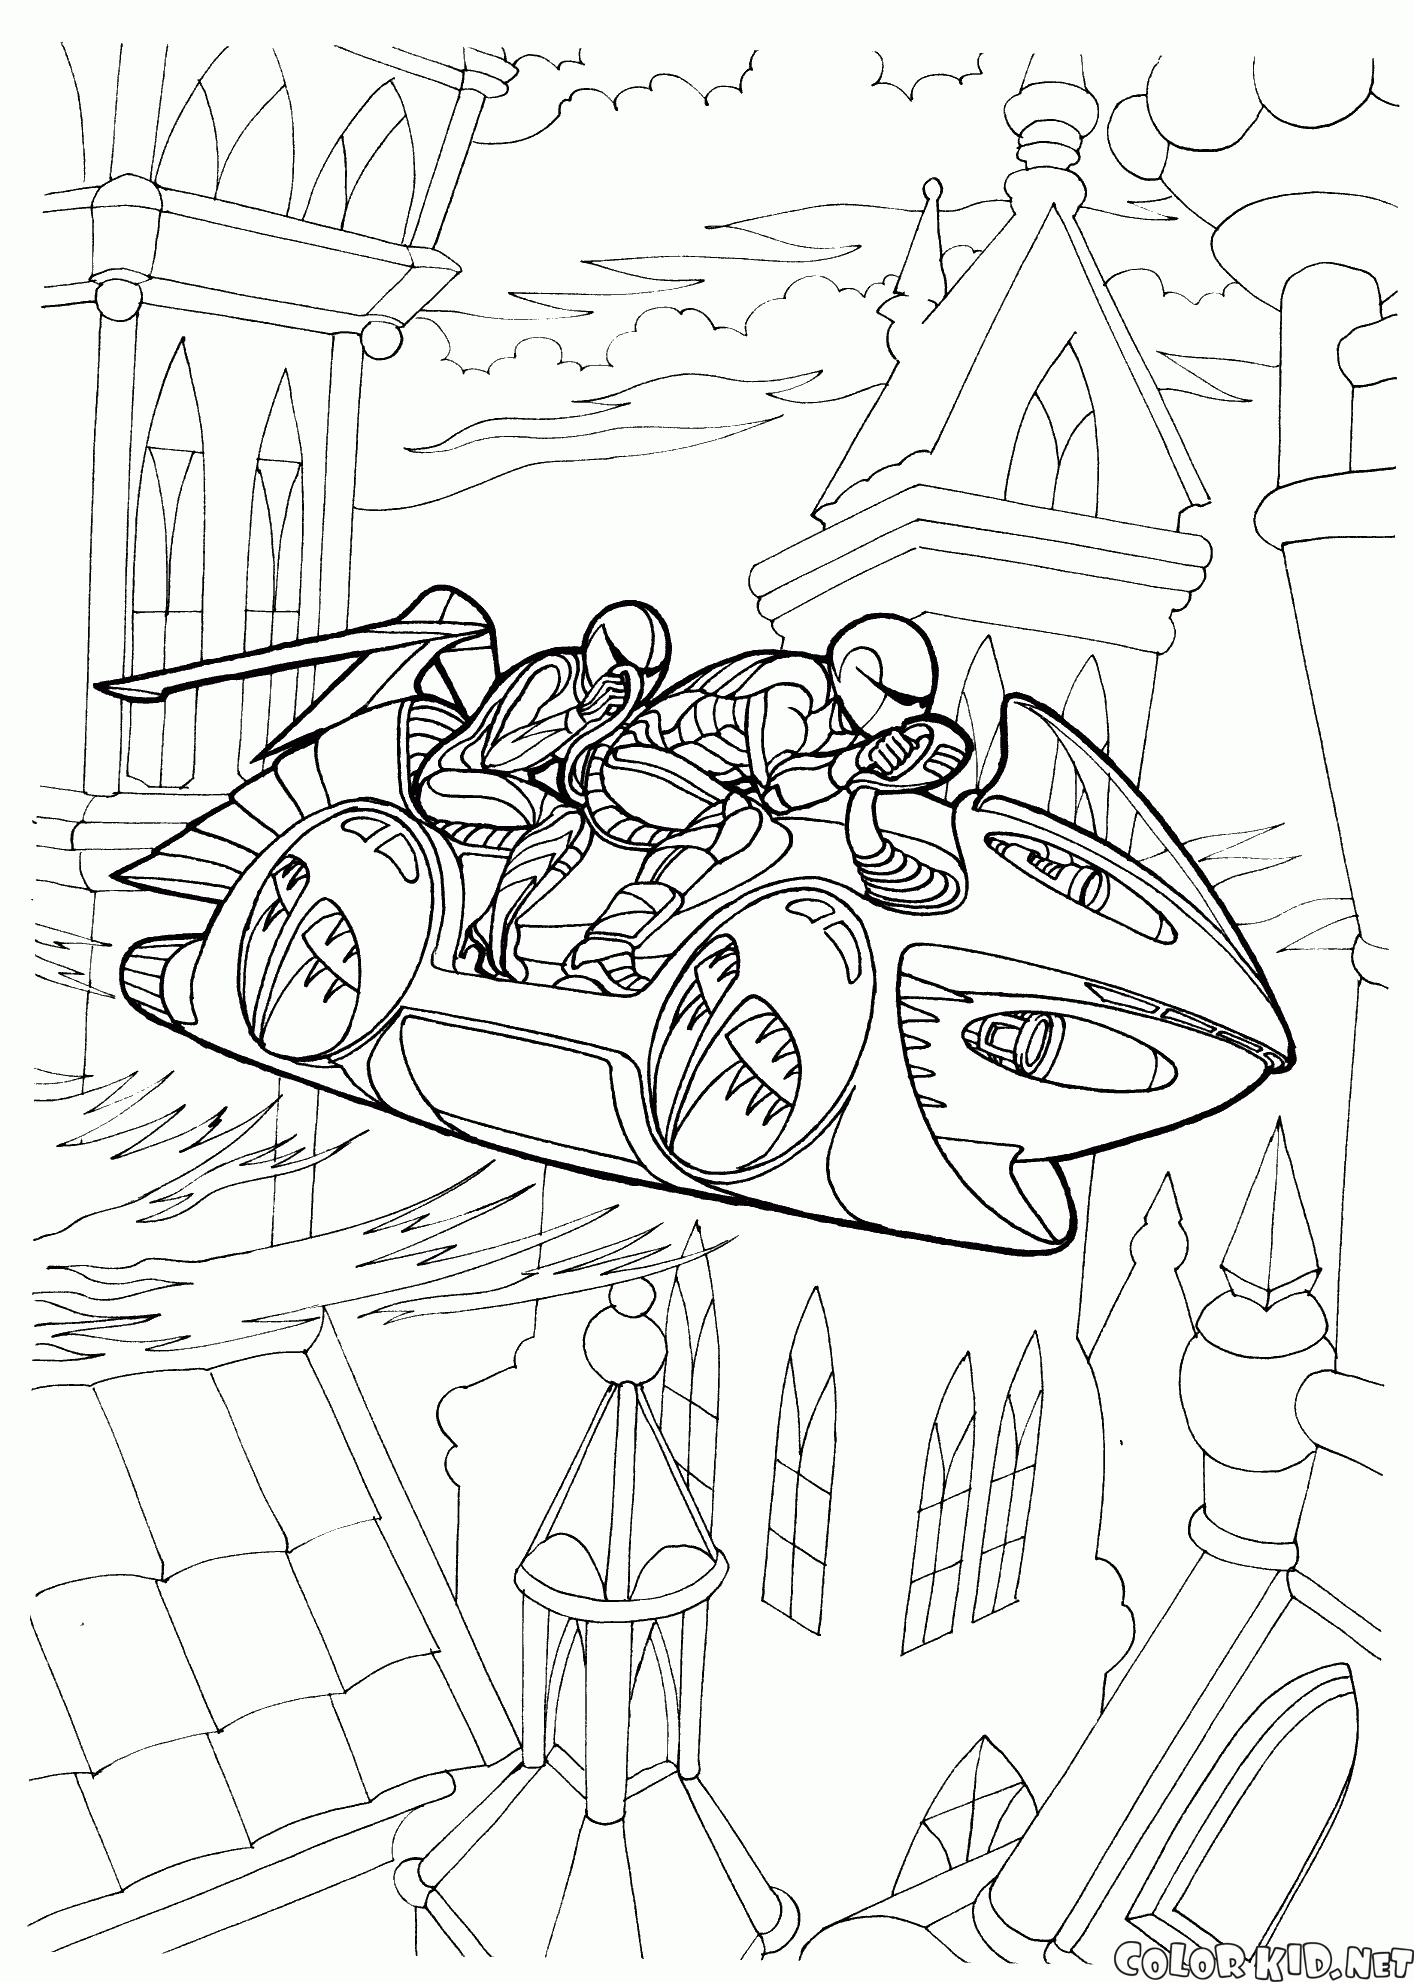 Coloring page - The aircraft of the future